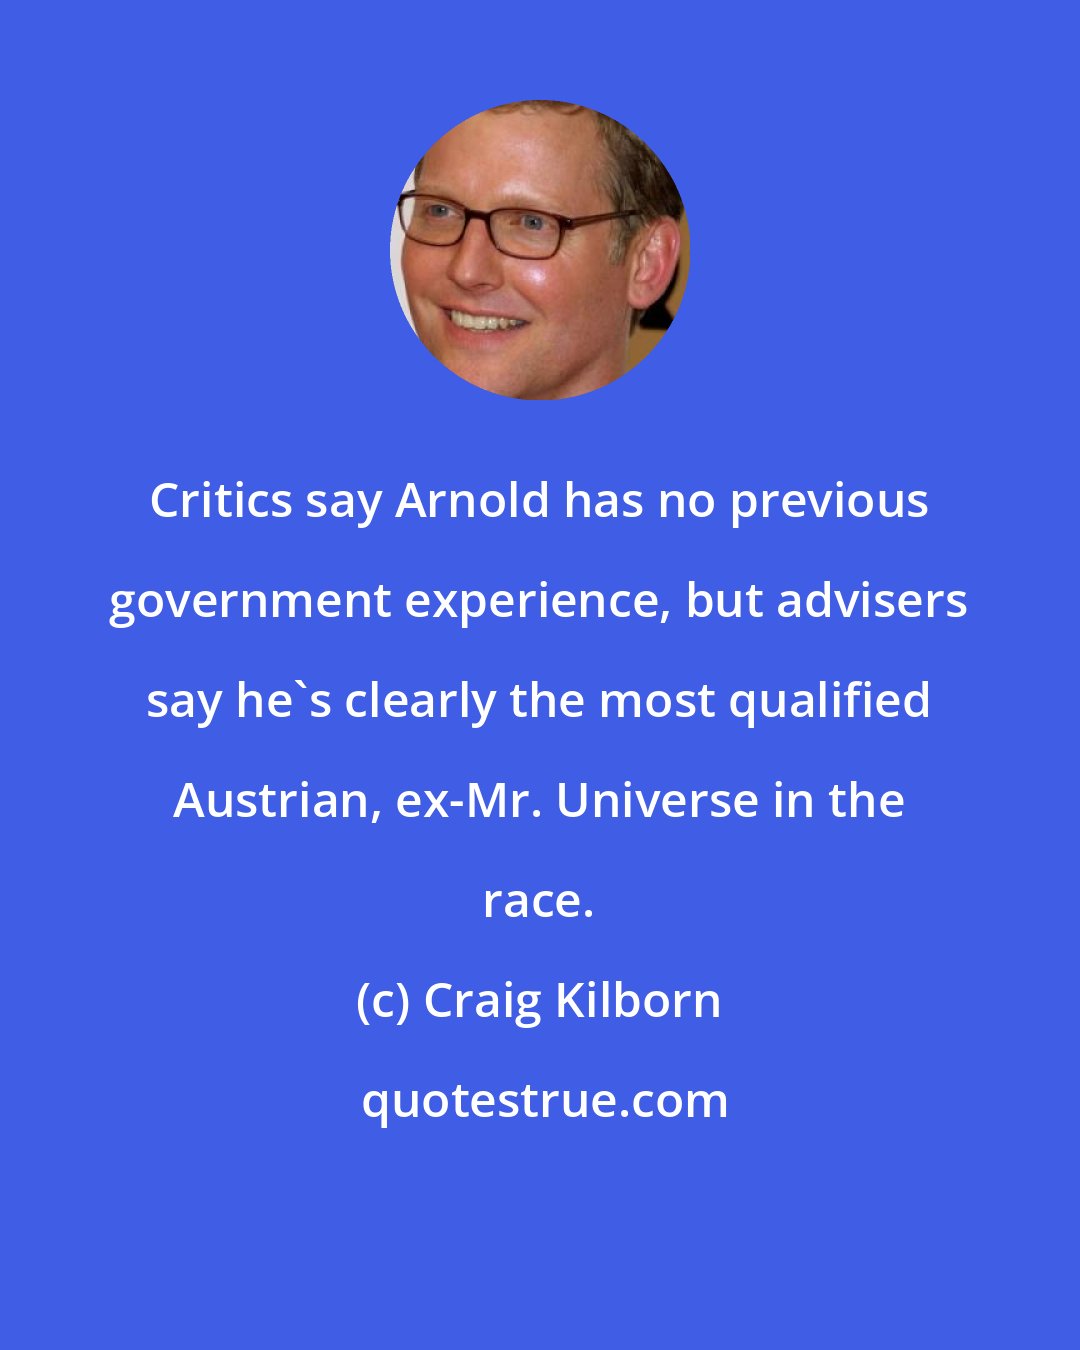 Craig Kilborn: Critics say Arnold has no previous government experience, but advisers say he's clearly the most qualified Austrian, ex-Mr. Universe in the race.